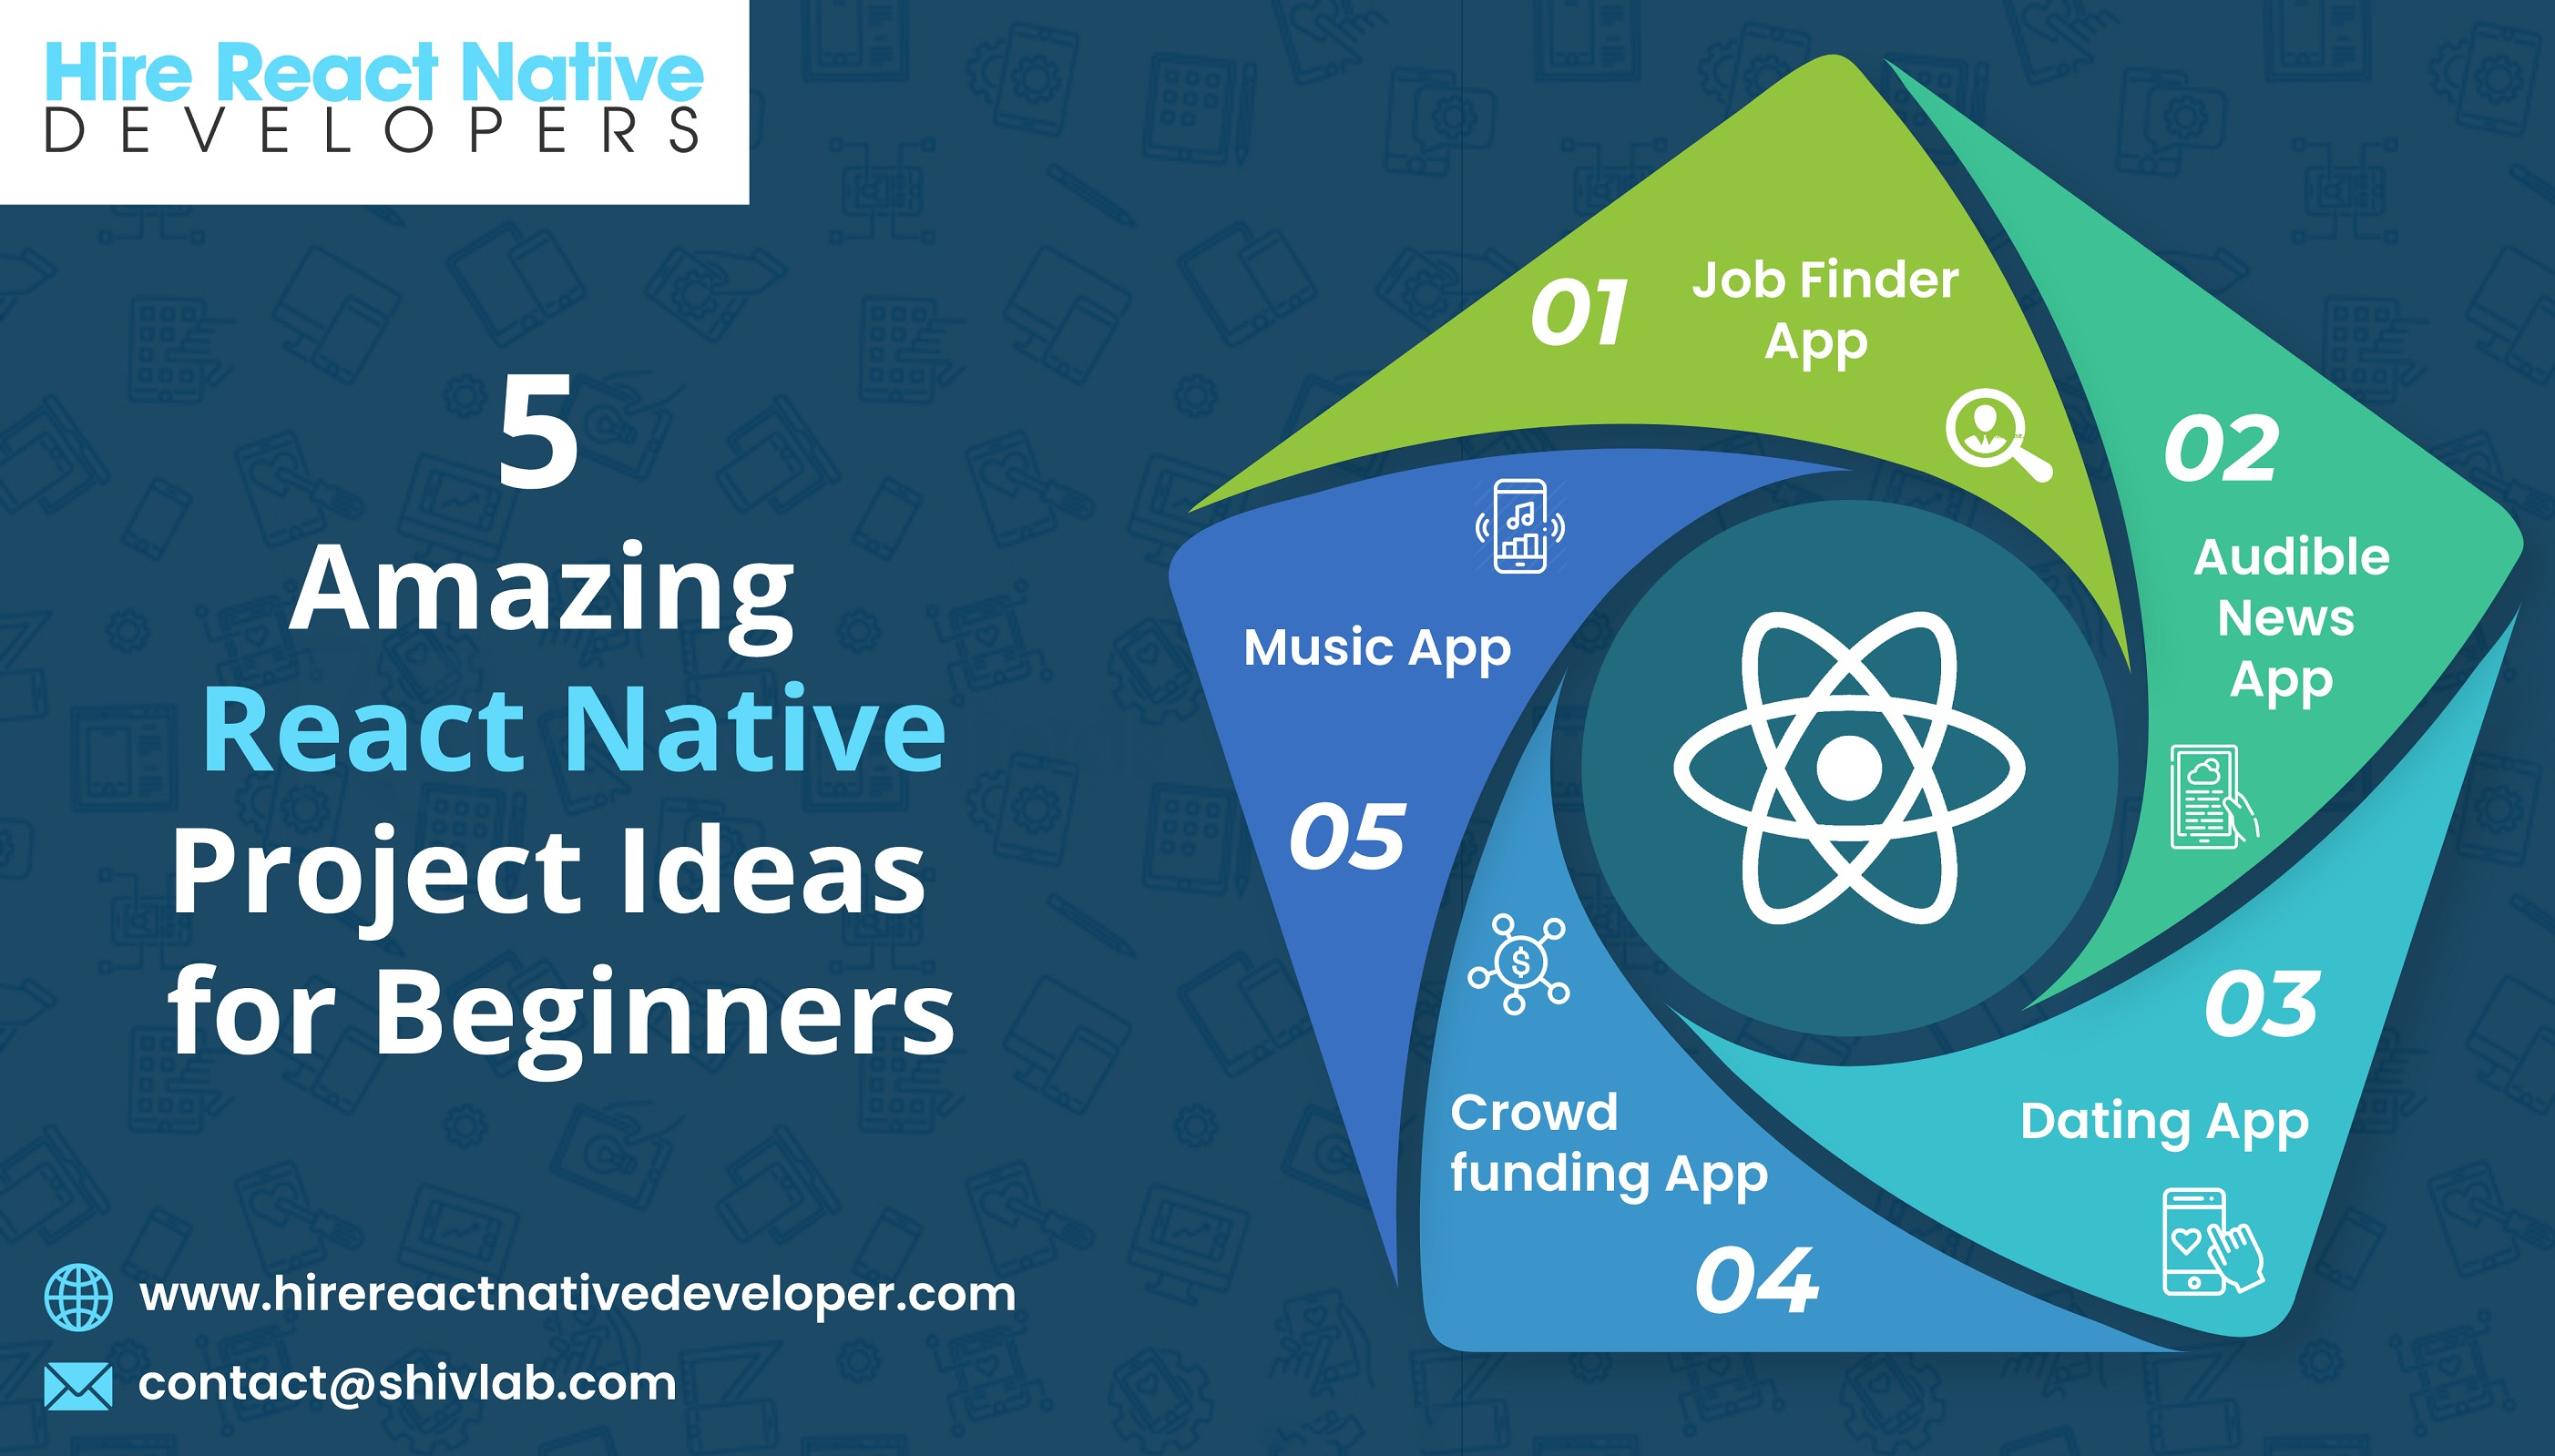 5 Amazing React Native Project Ideas for Beginners